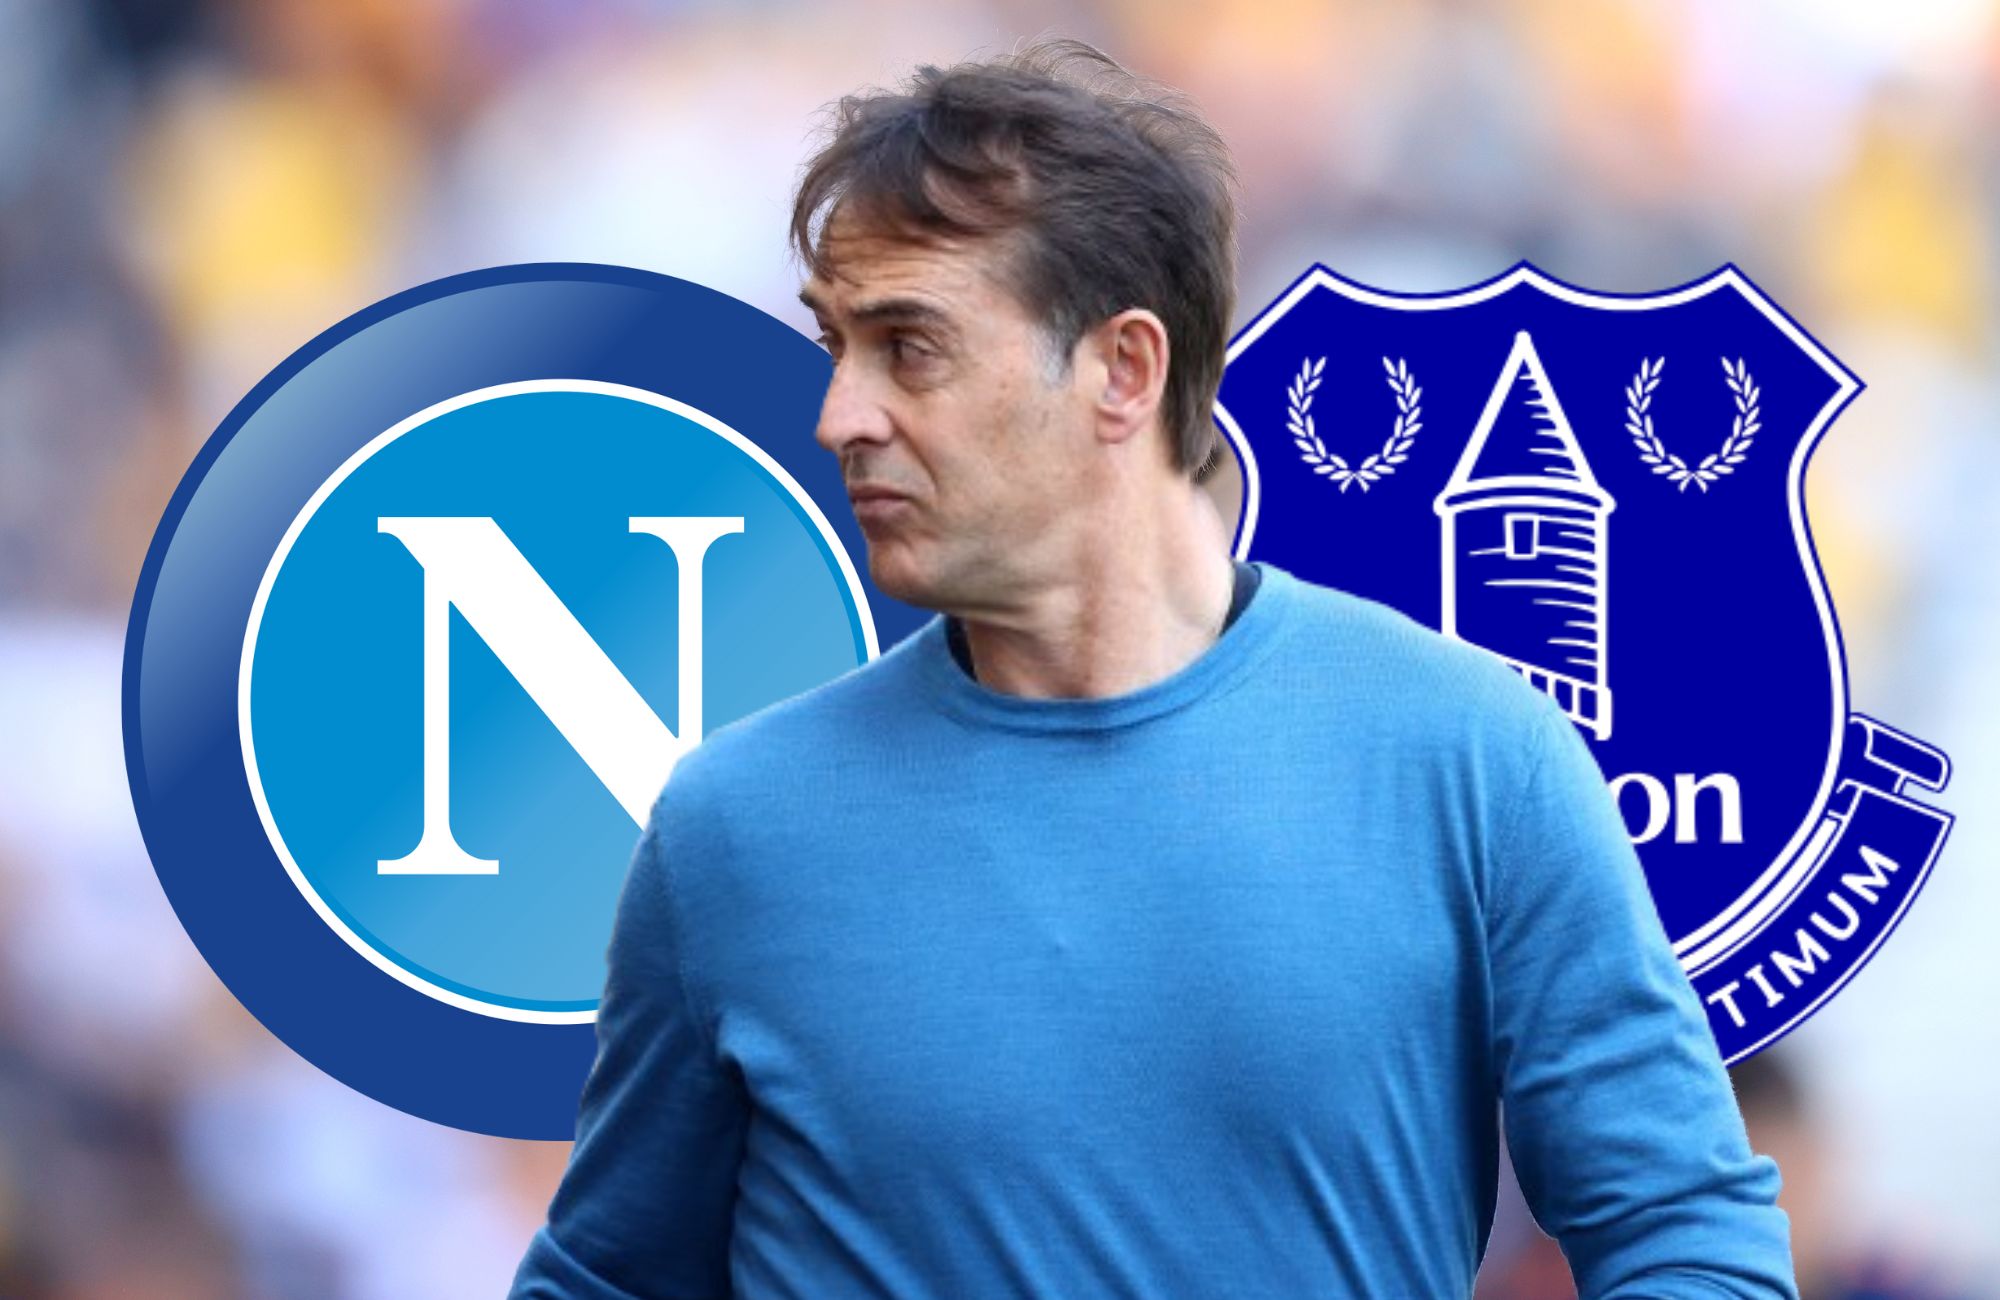 Exclusive: West Ham secure meeting with Napoli & Everton target’s agents as bargain price details emerge